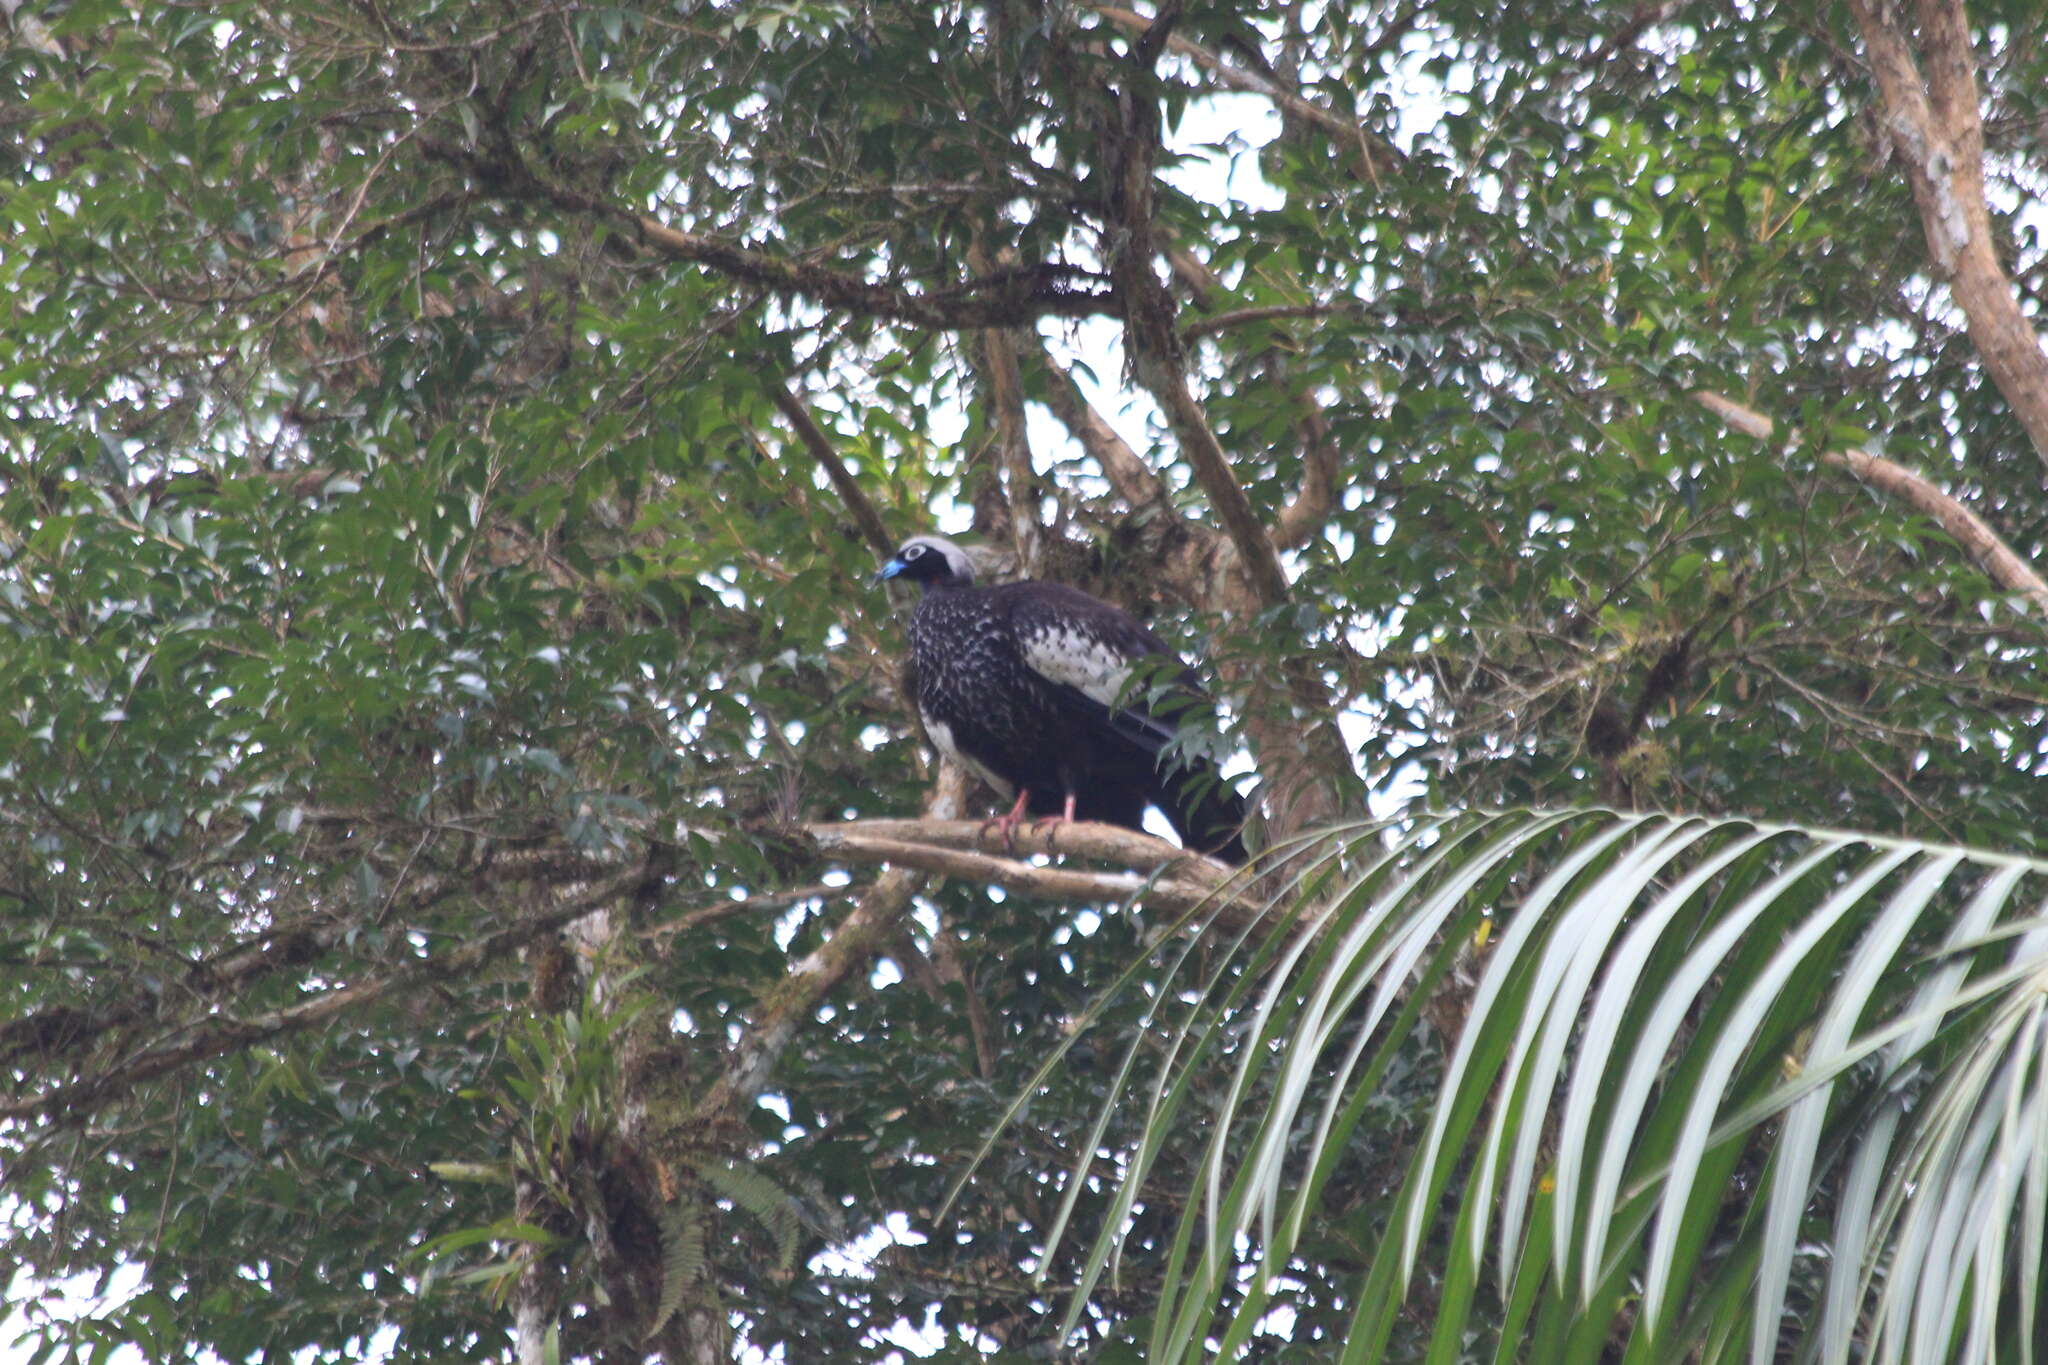 Image of Black Fronted Curassow